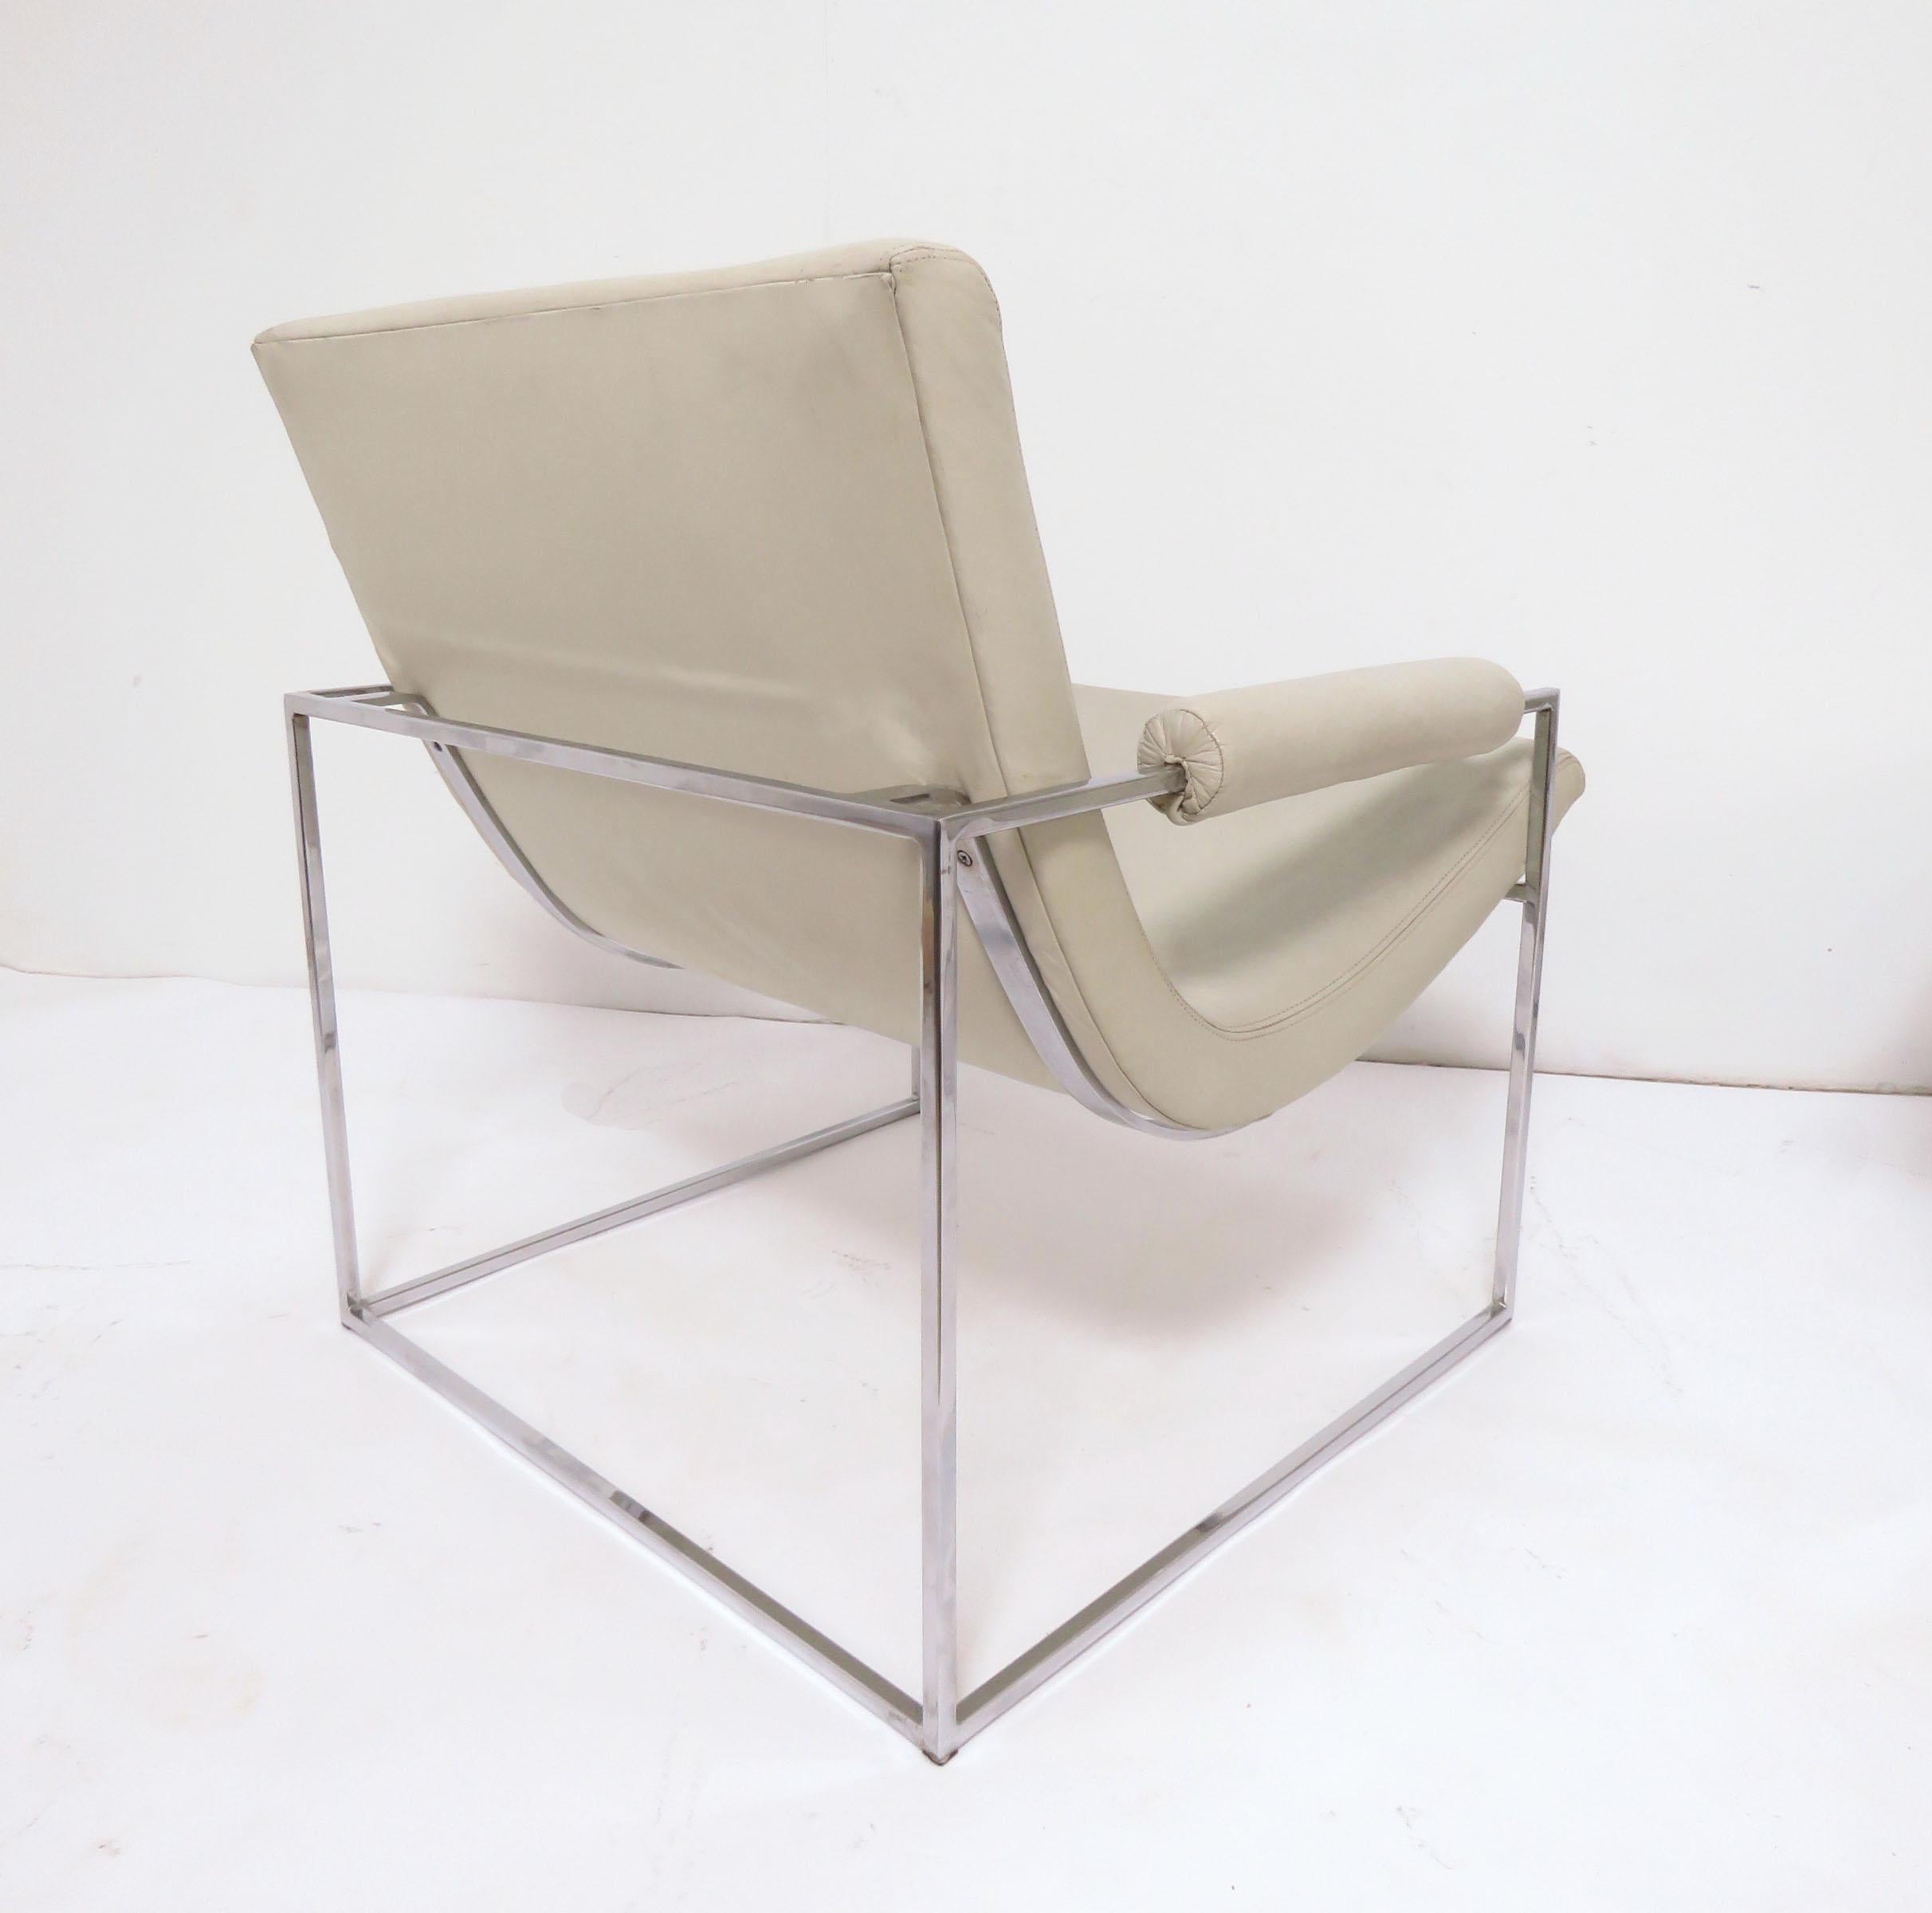 Chrome Pair of Leather Milo Baughman Scoop Lounge Chairs for Thayer Coggin